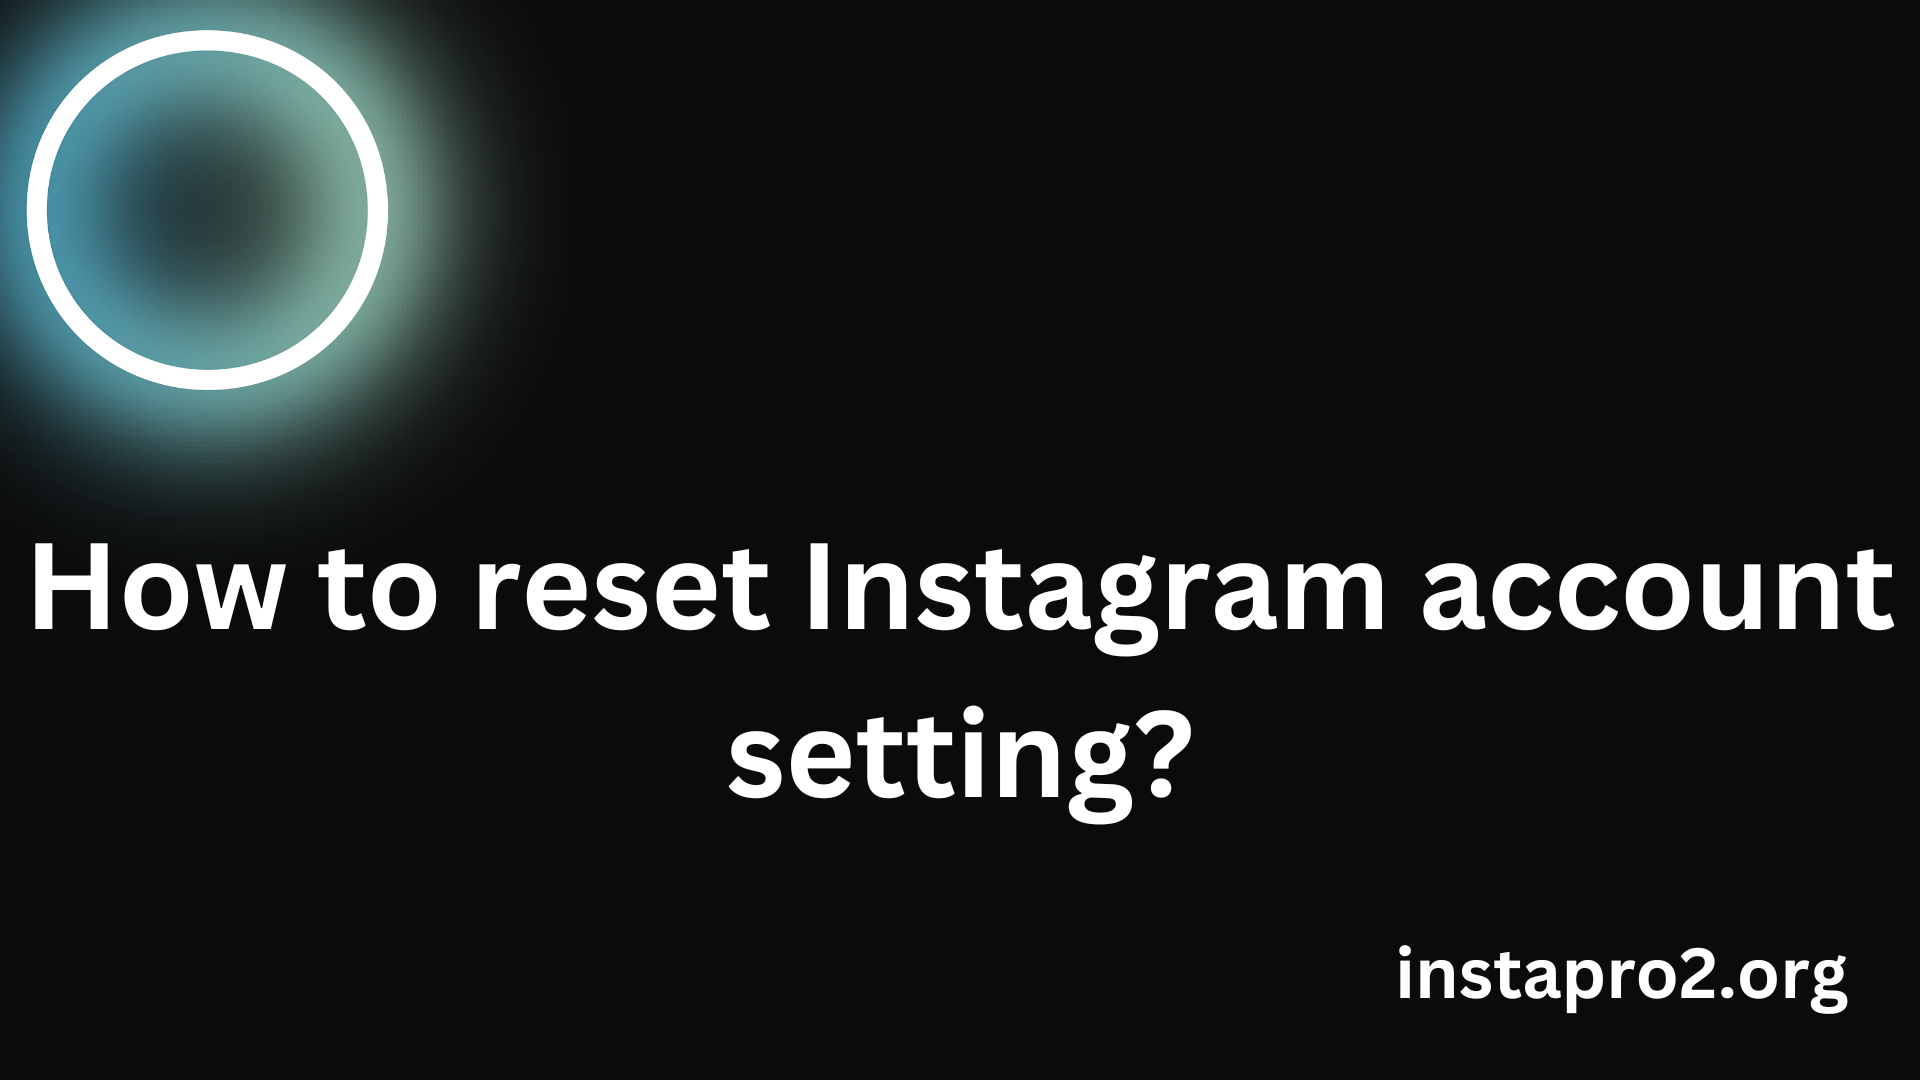 How to reset Instagram account setting?